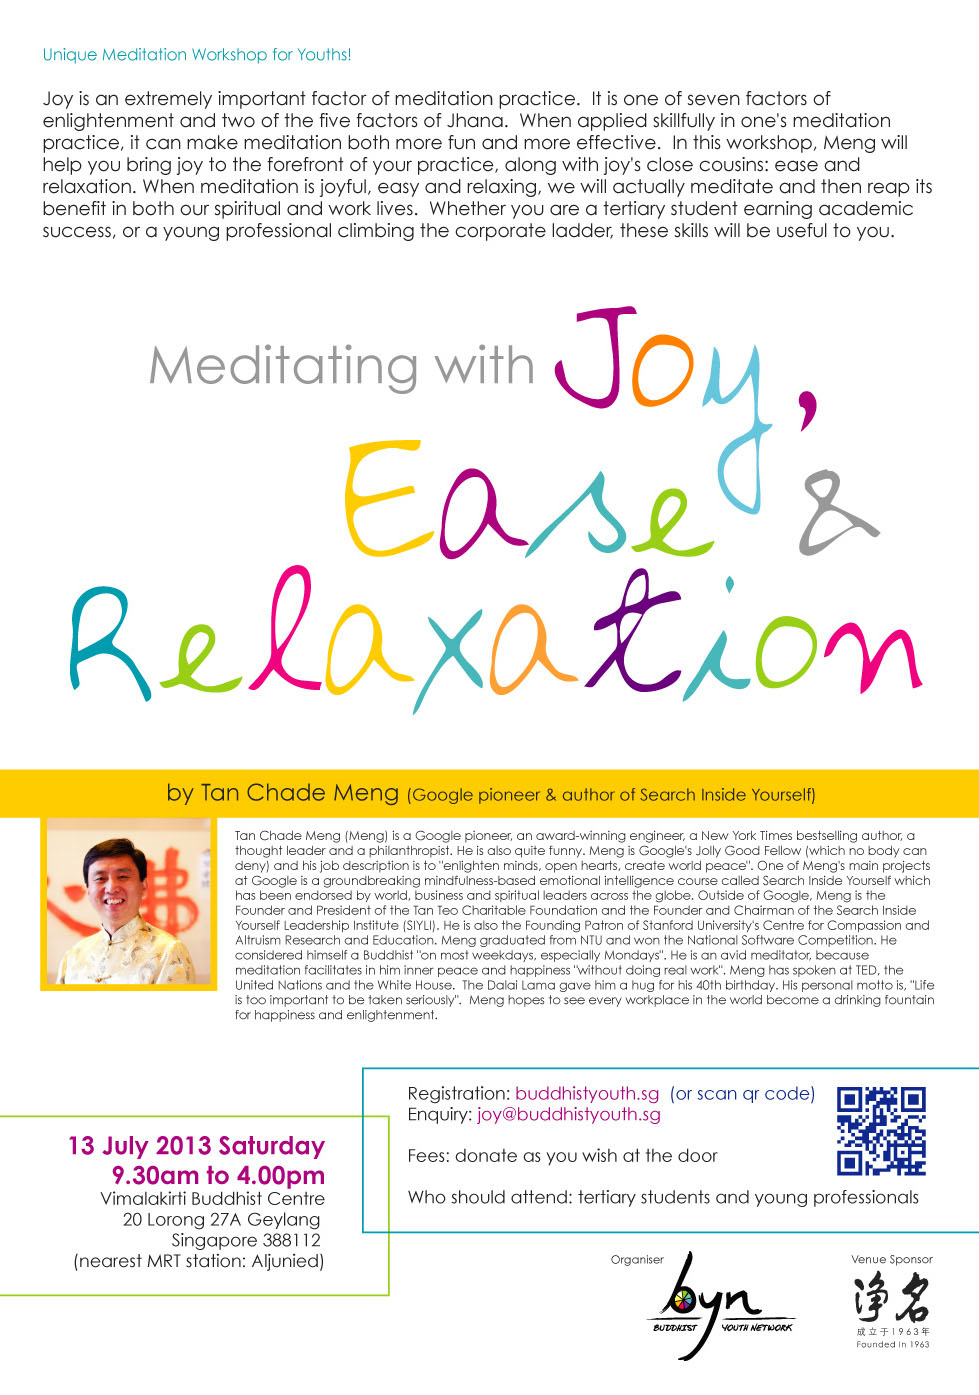 13 July: Meditation Workshop for Youths with Mr Tan Chade Meng